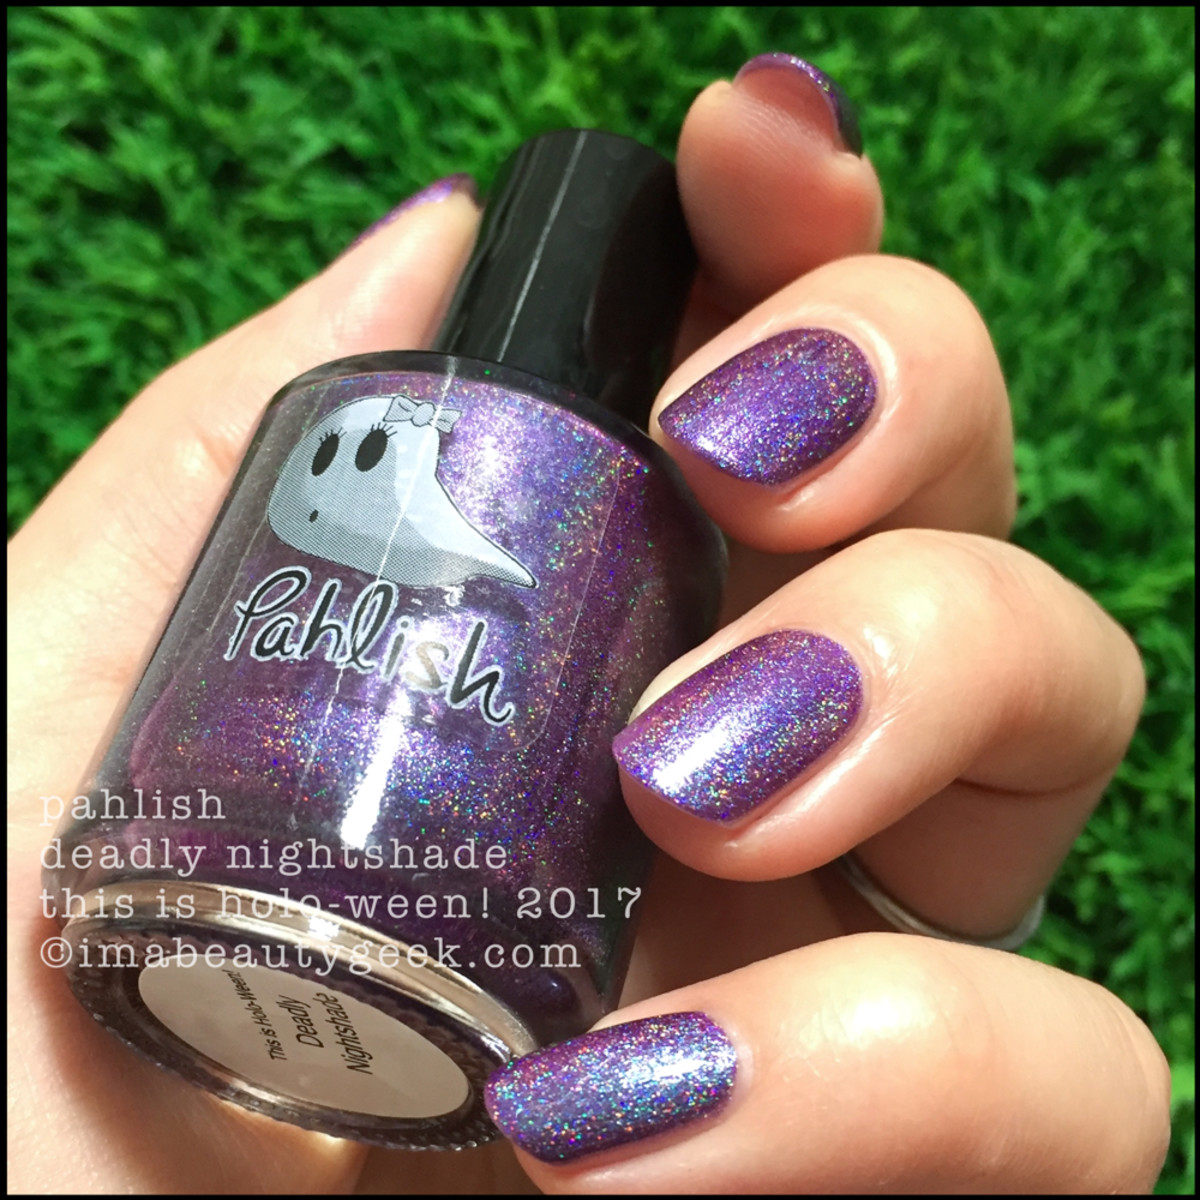 Pahlish Deadly Nightshade 2 - This is Holo-ween! 2017